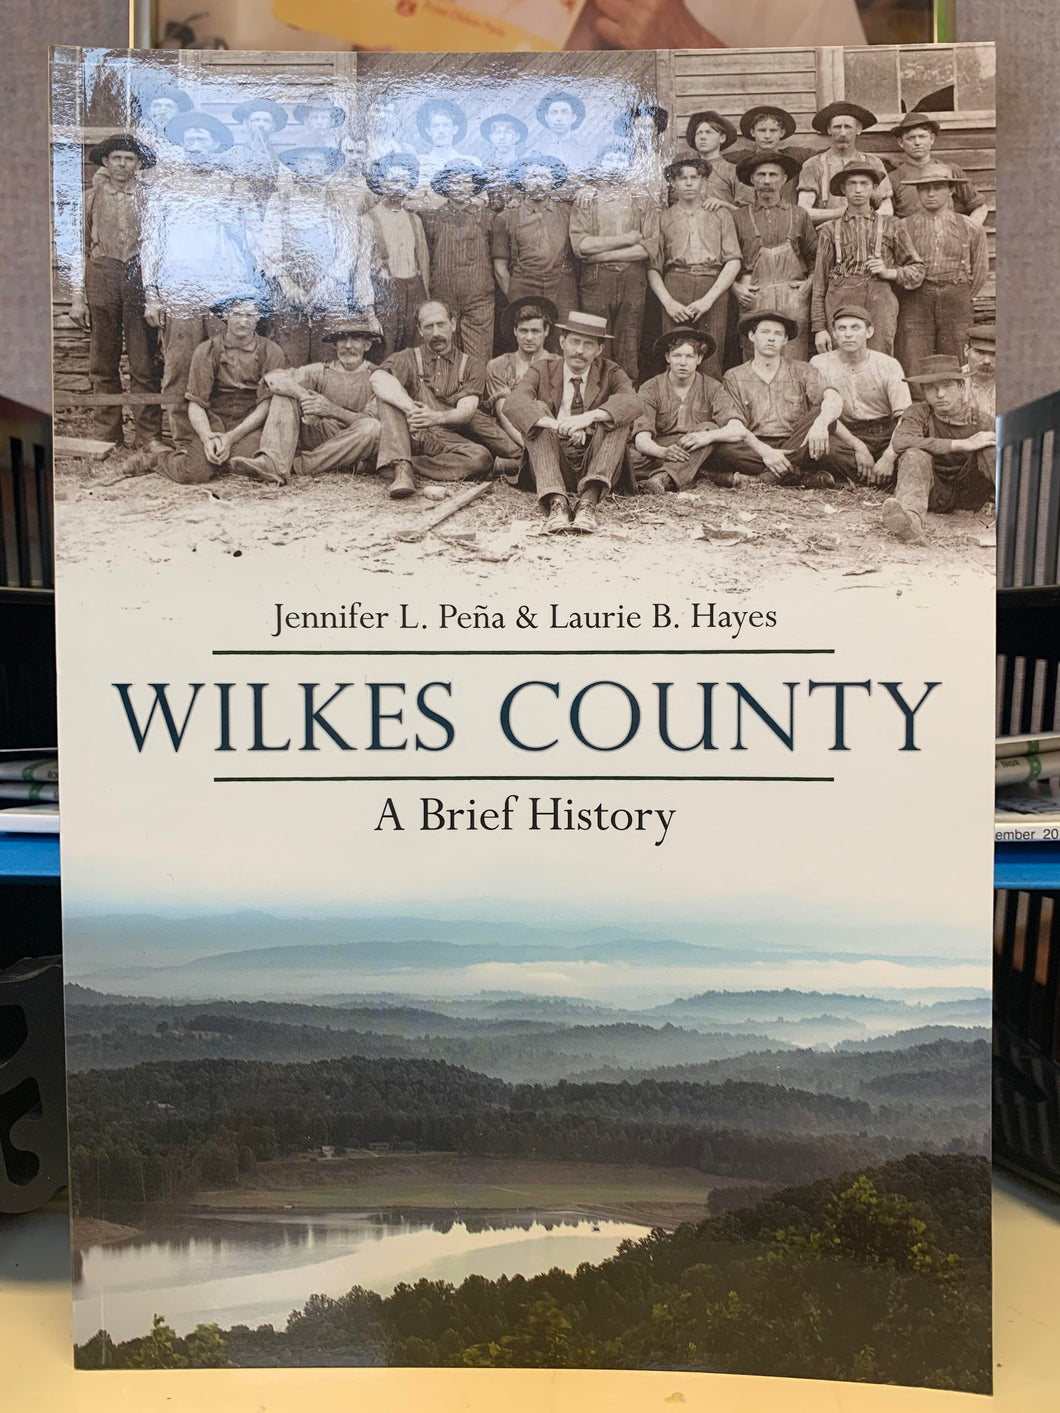 A Brief History of Wilkes County by Jennifer L. Peña and Laurie B. Hayes